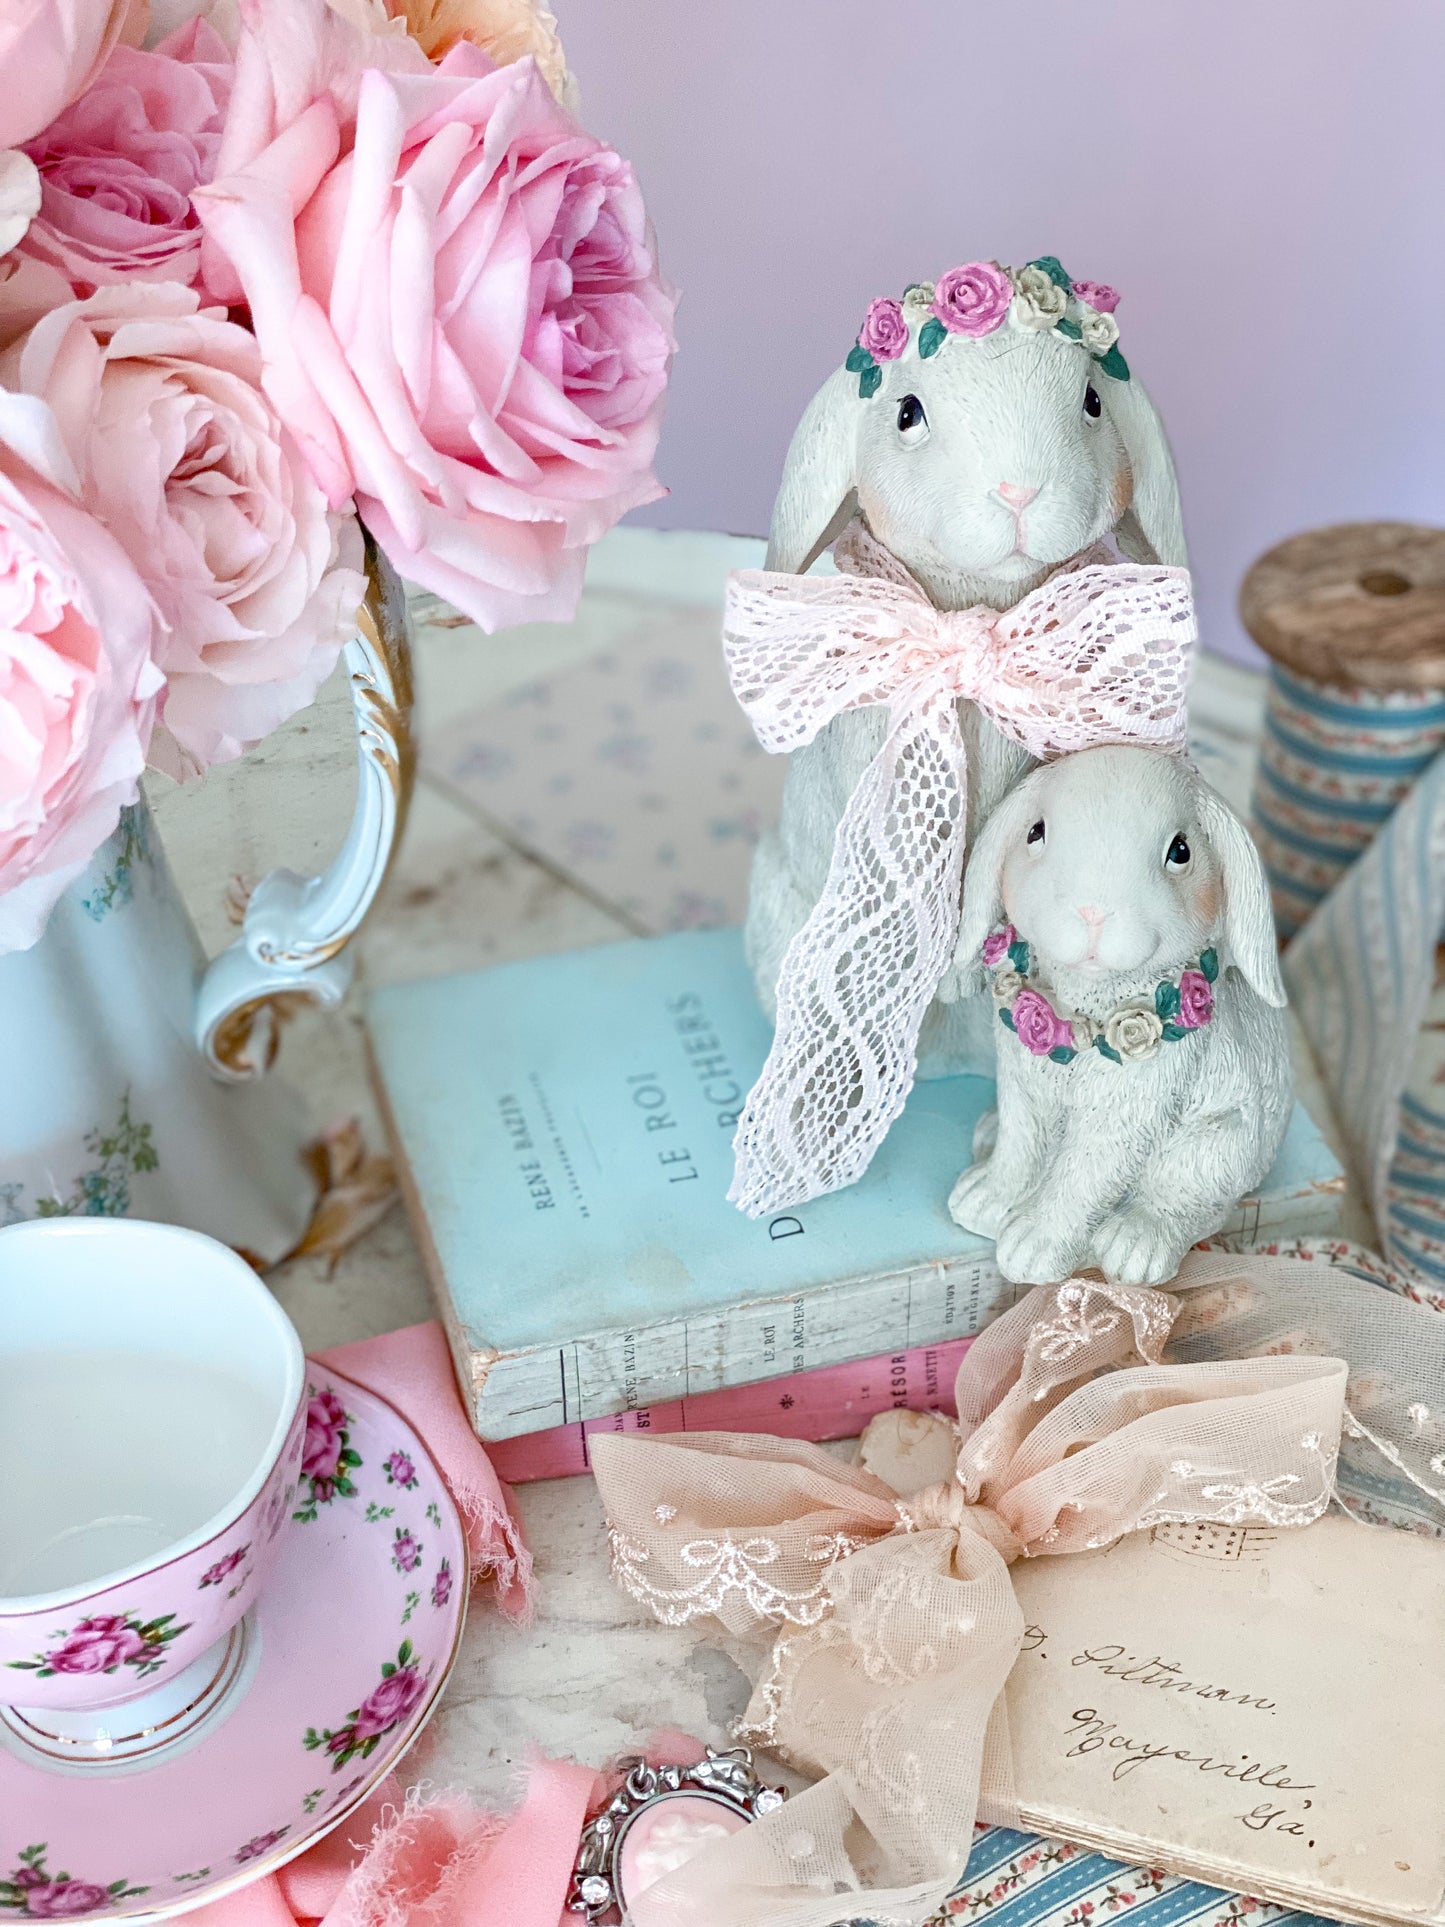 Mama and Baby Bunny with Floral Headbands Figurine